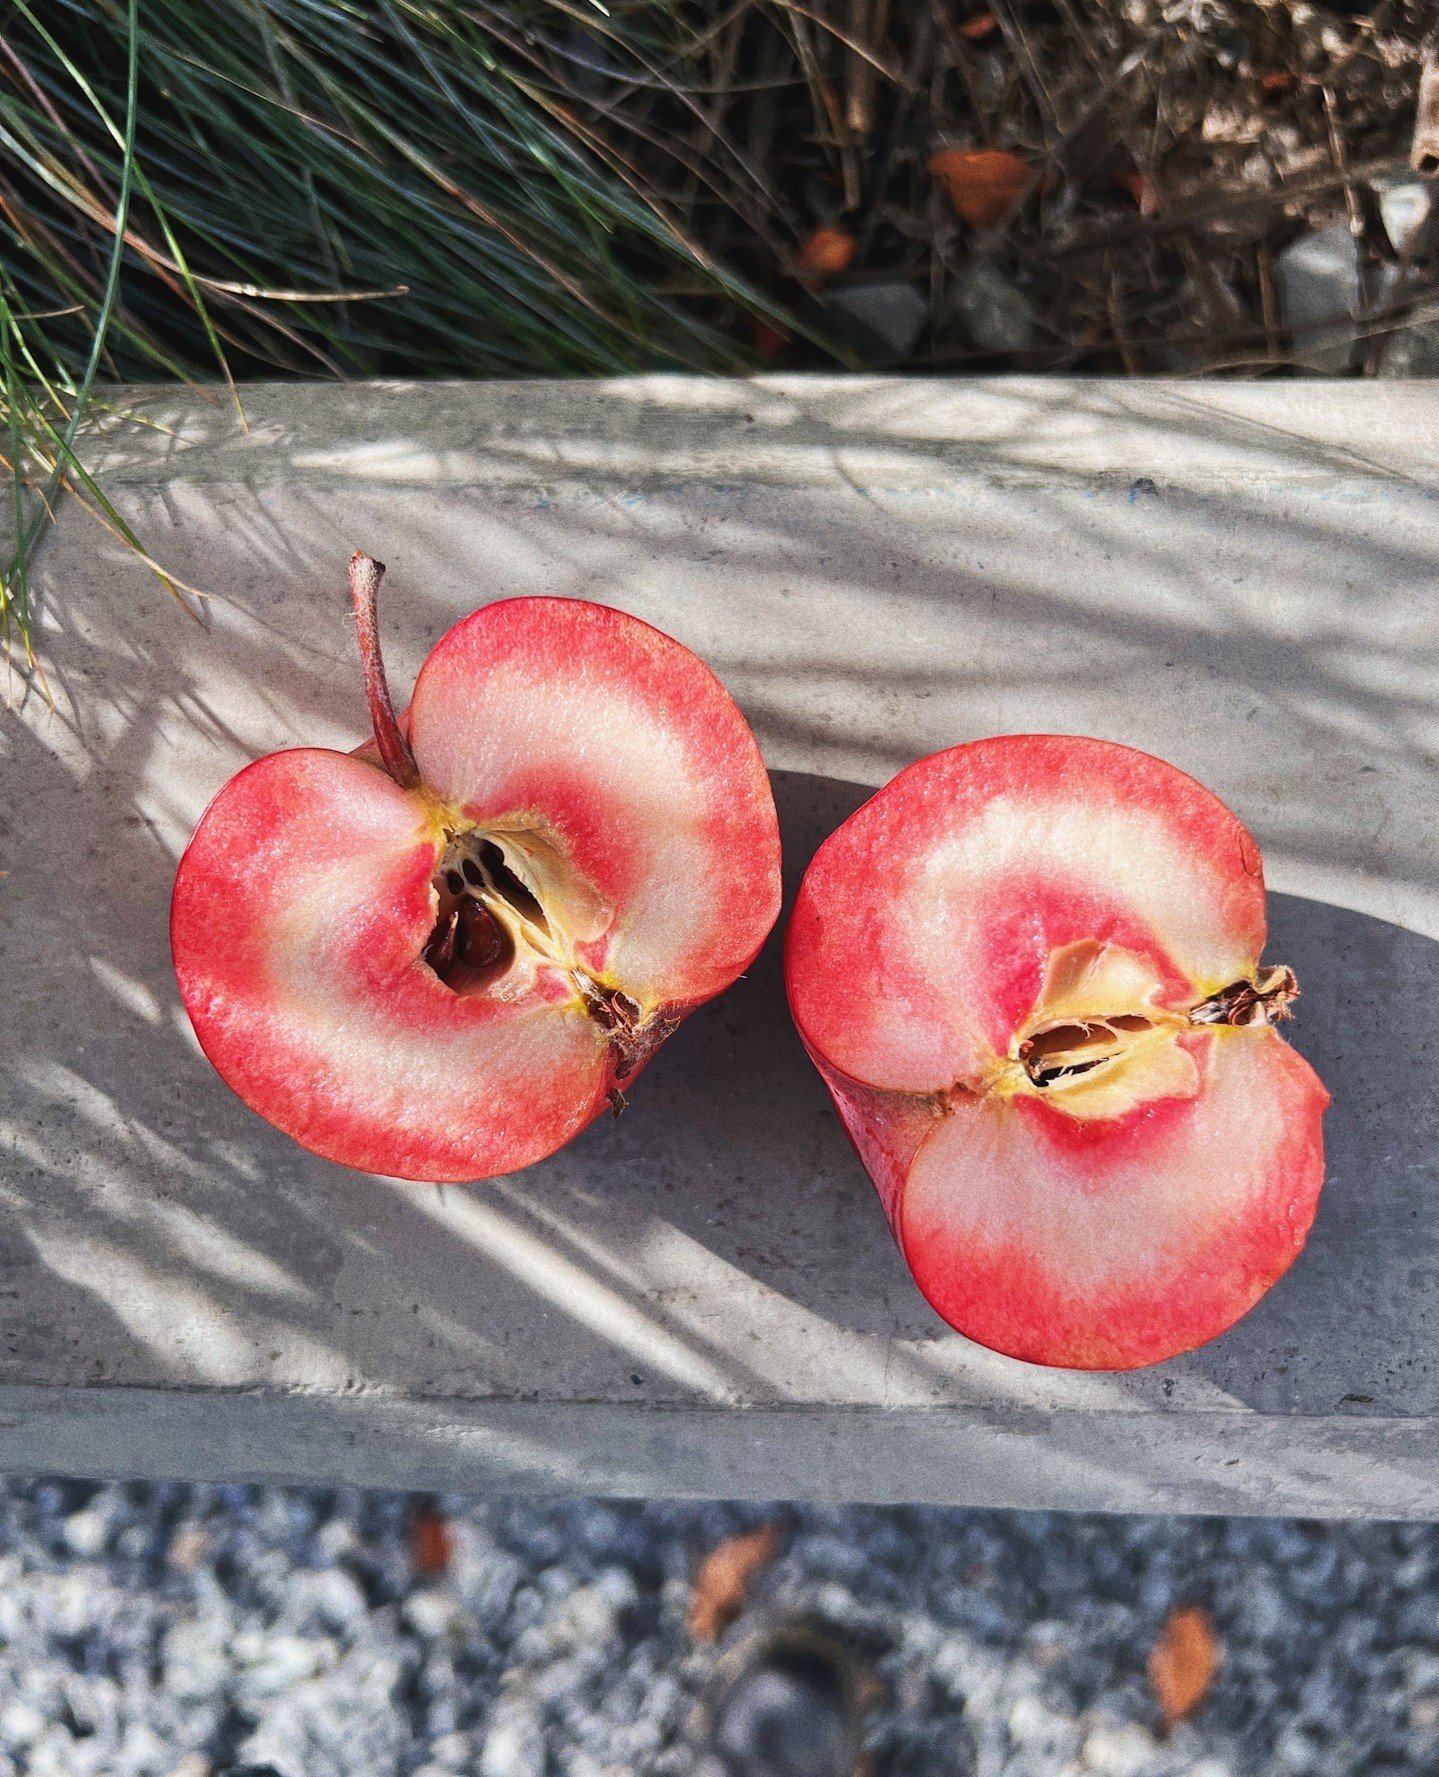 Check out these red fleshed apples straight from our home in Wenatchee, WA! These exceptional apples are renowned for their striking rosey hue and bold flavor profile. With their natural pink interior, these red fleshed apples have their origins as w